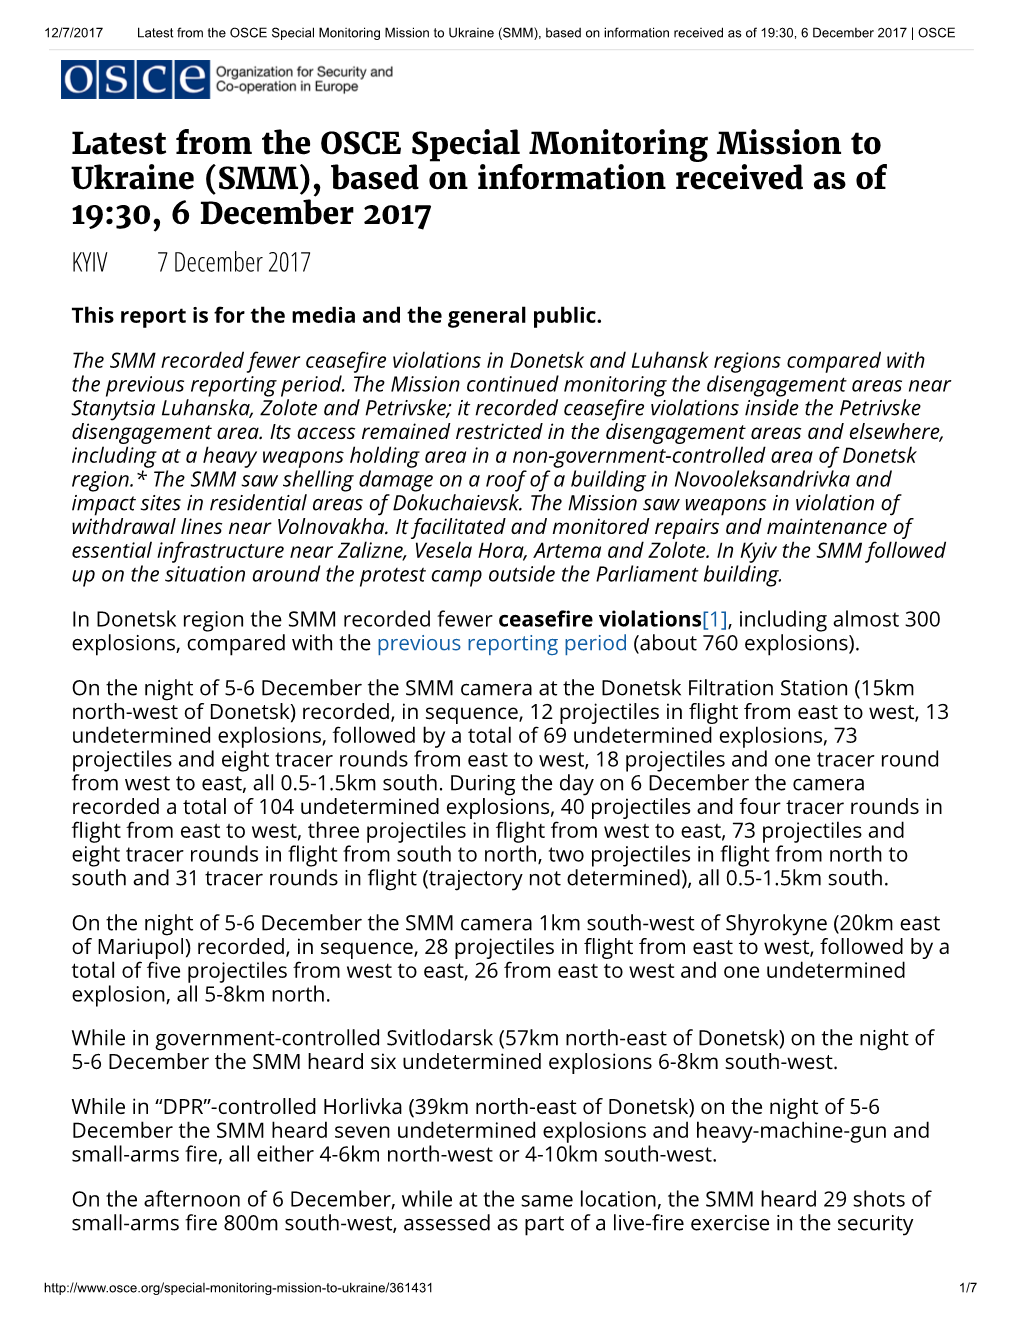 Latest from the OSCE Special Monitoring Mission to Ukraine (SMM), Based on Information Received As of 19:30, 6 December 2017 | OSCE